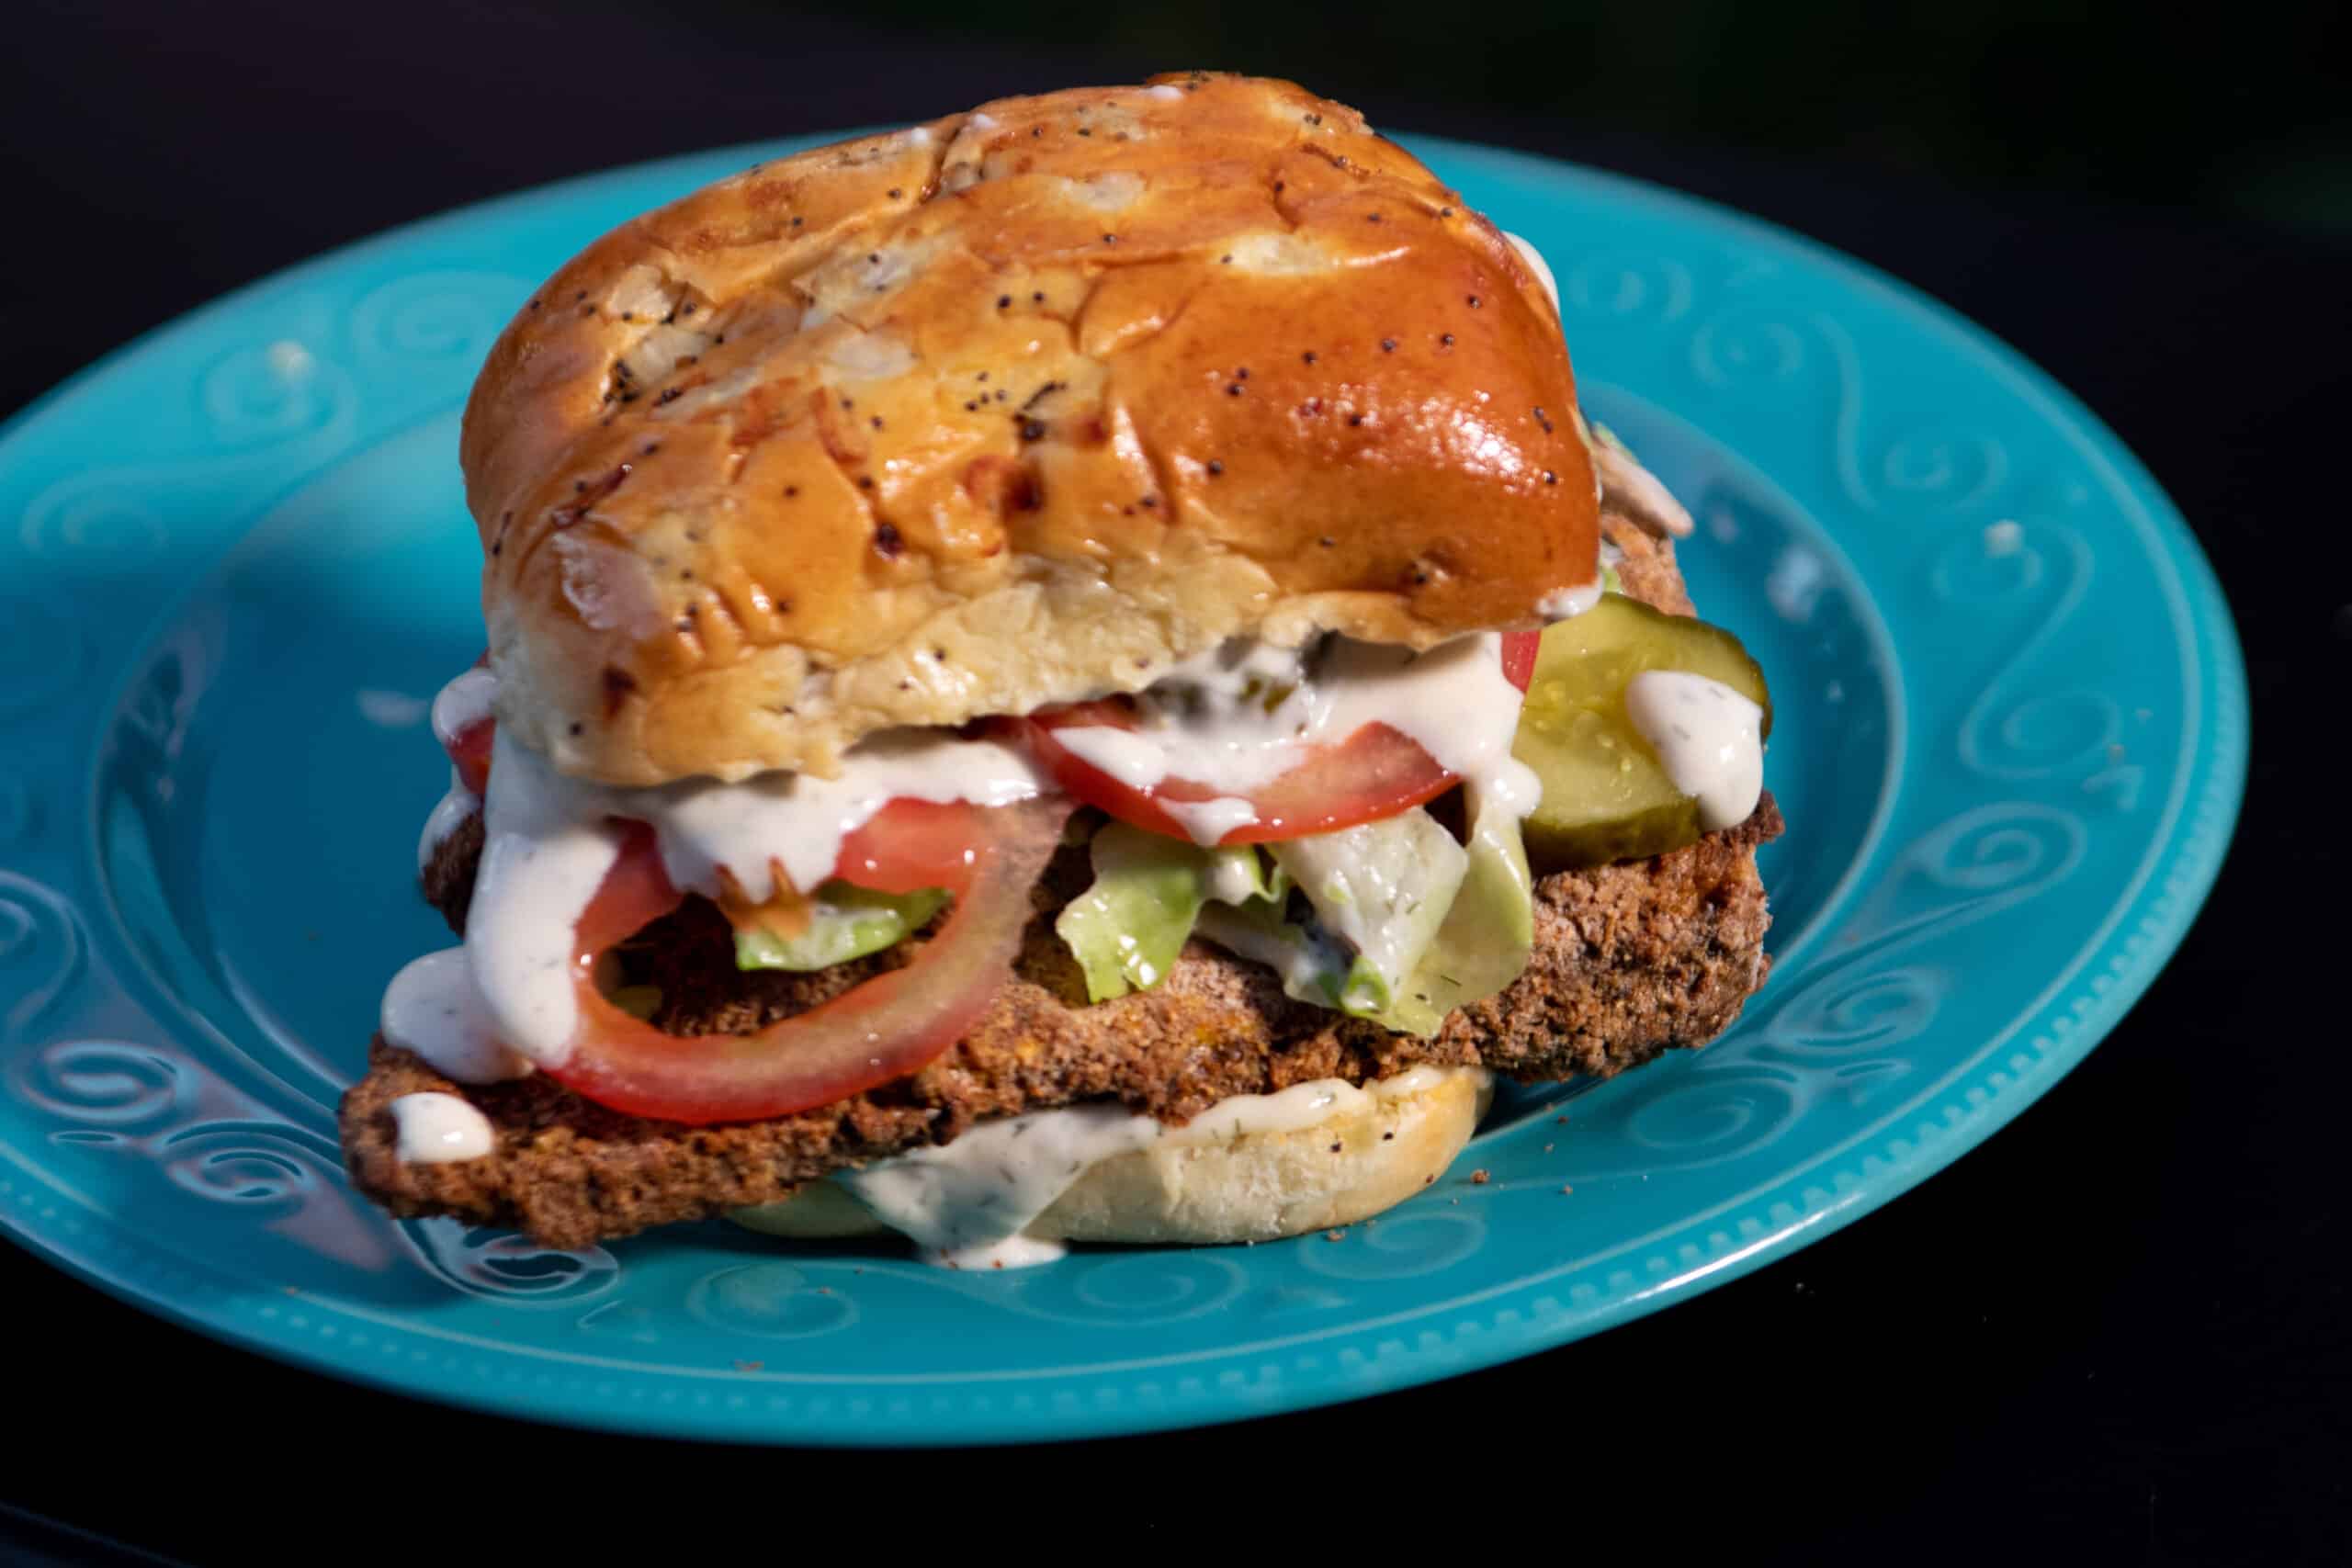 Fried Chicken of the Woods Sandwich, dripping in ranch, with tomatoes and pickles on an onion bun